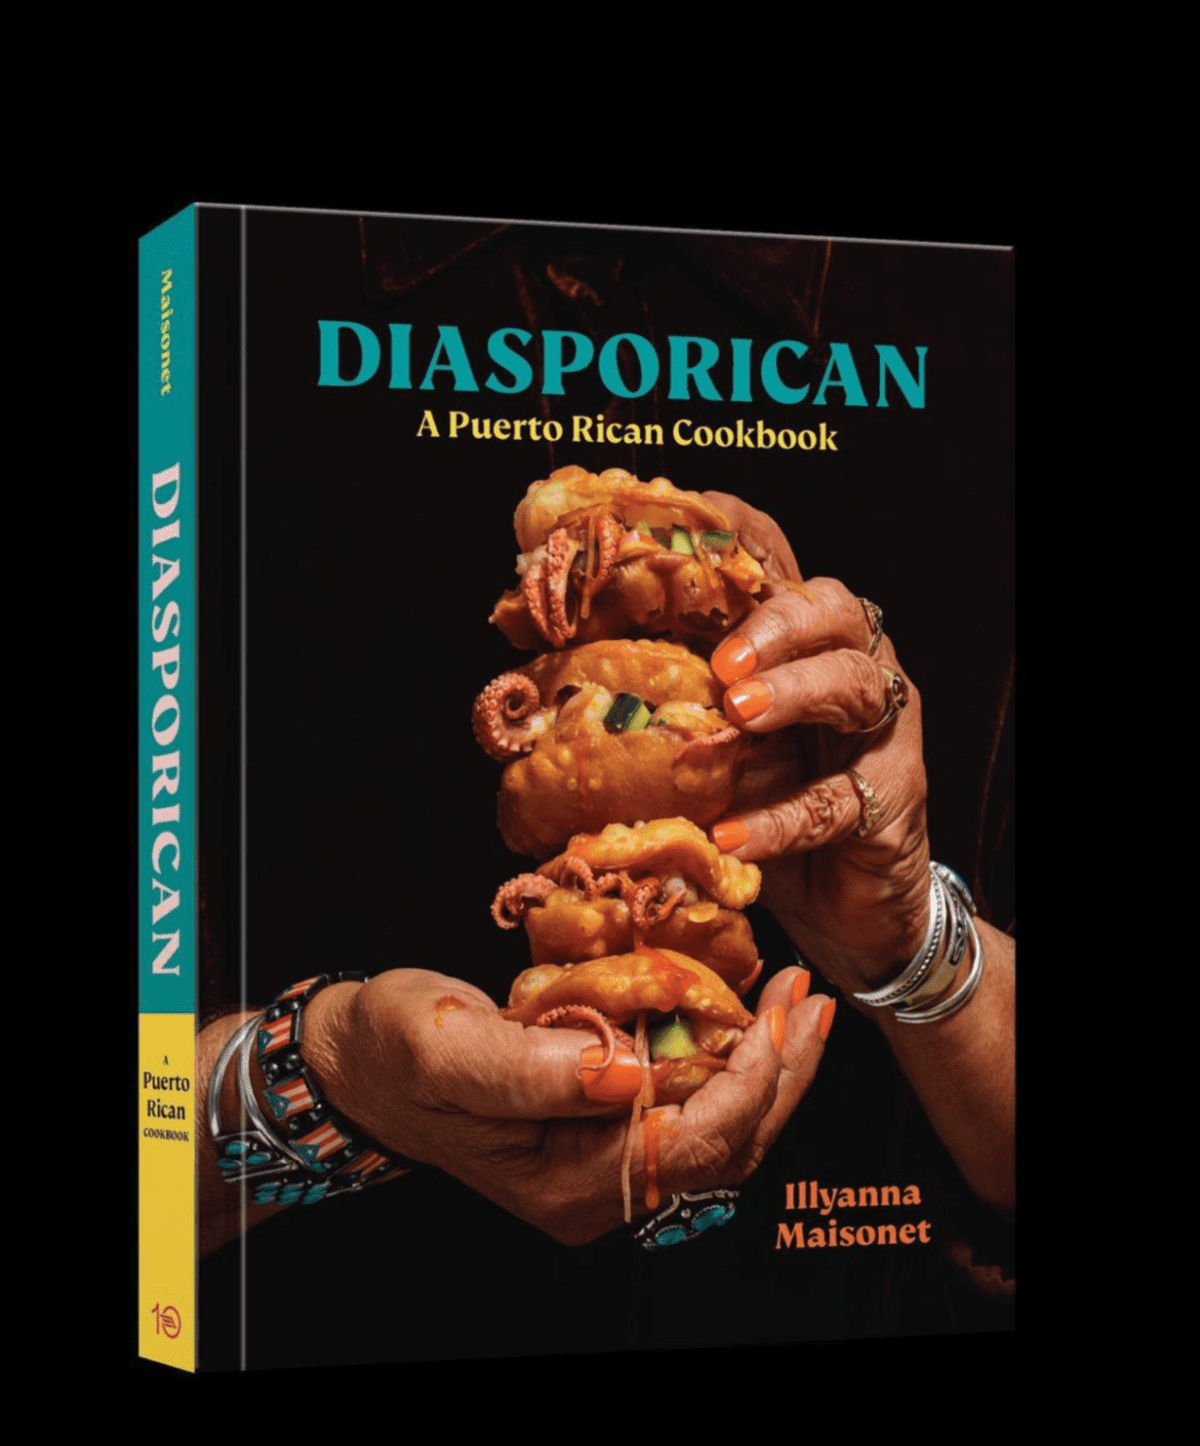 Diasporican, Illyanna's new cookbook. She's sharing her recipe for roasted chicken